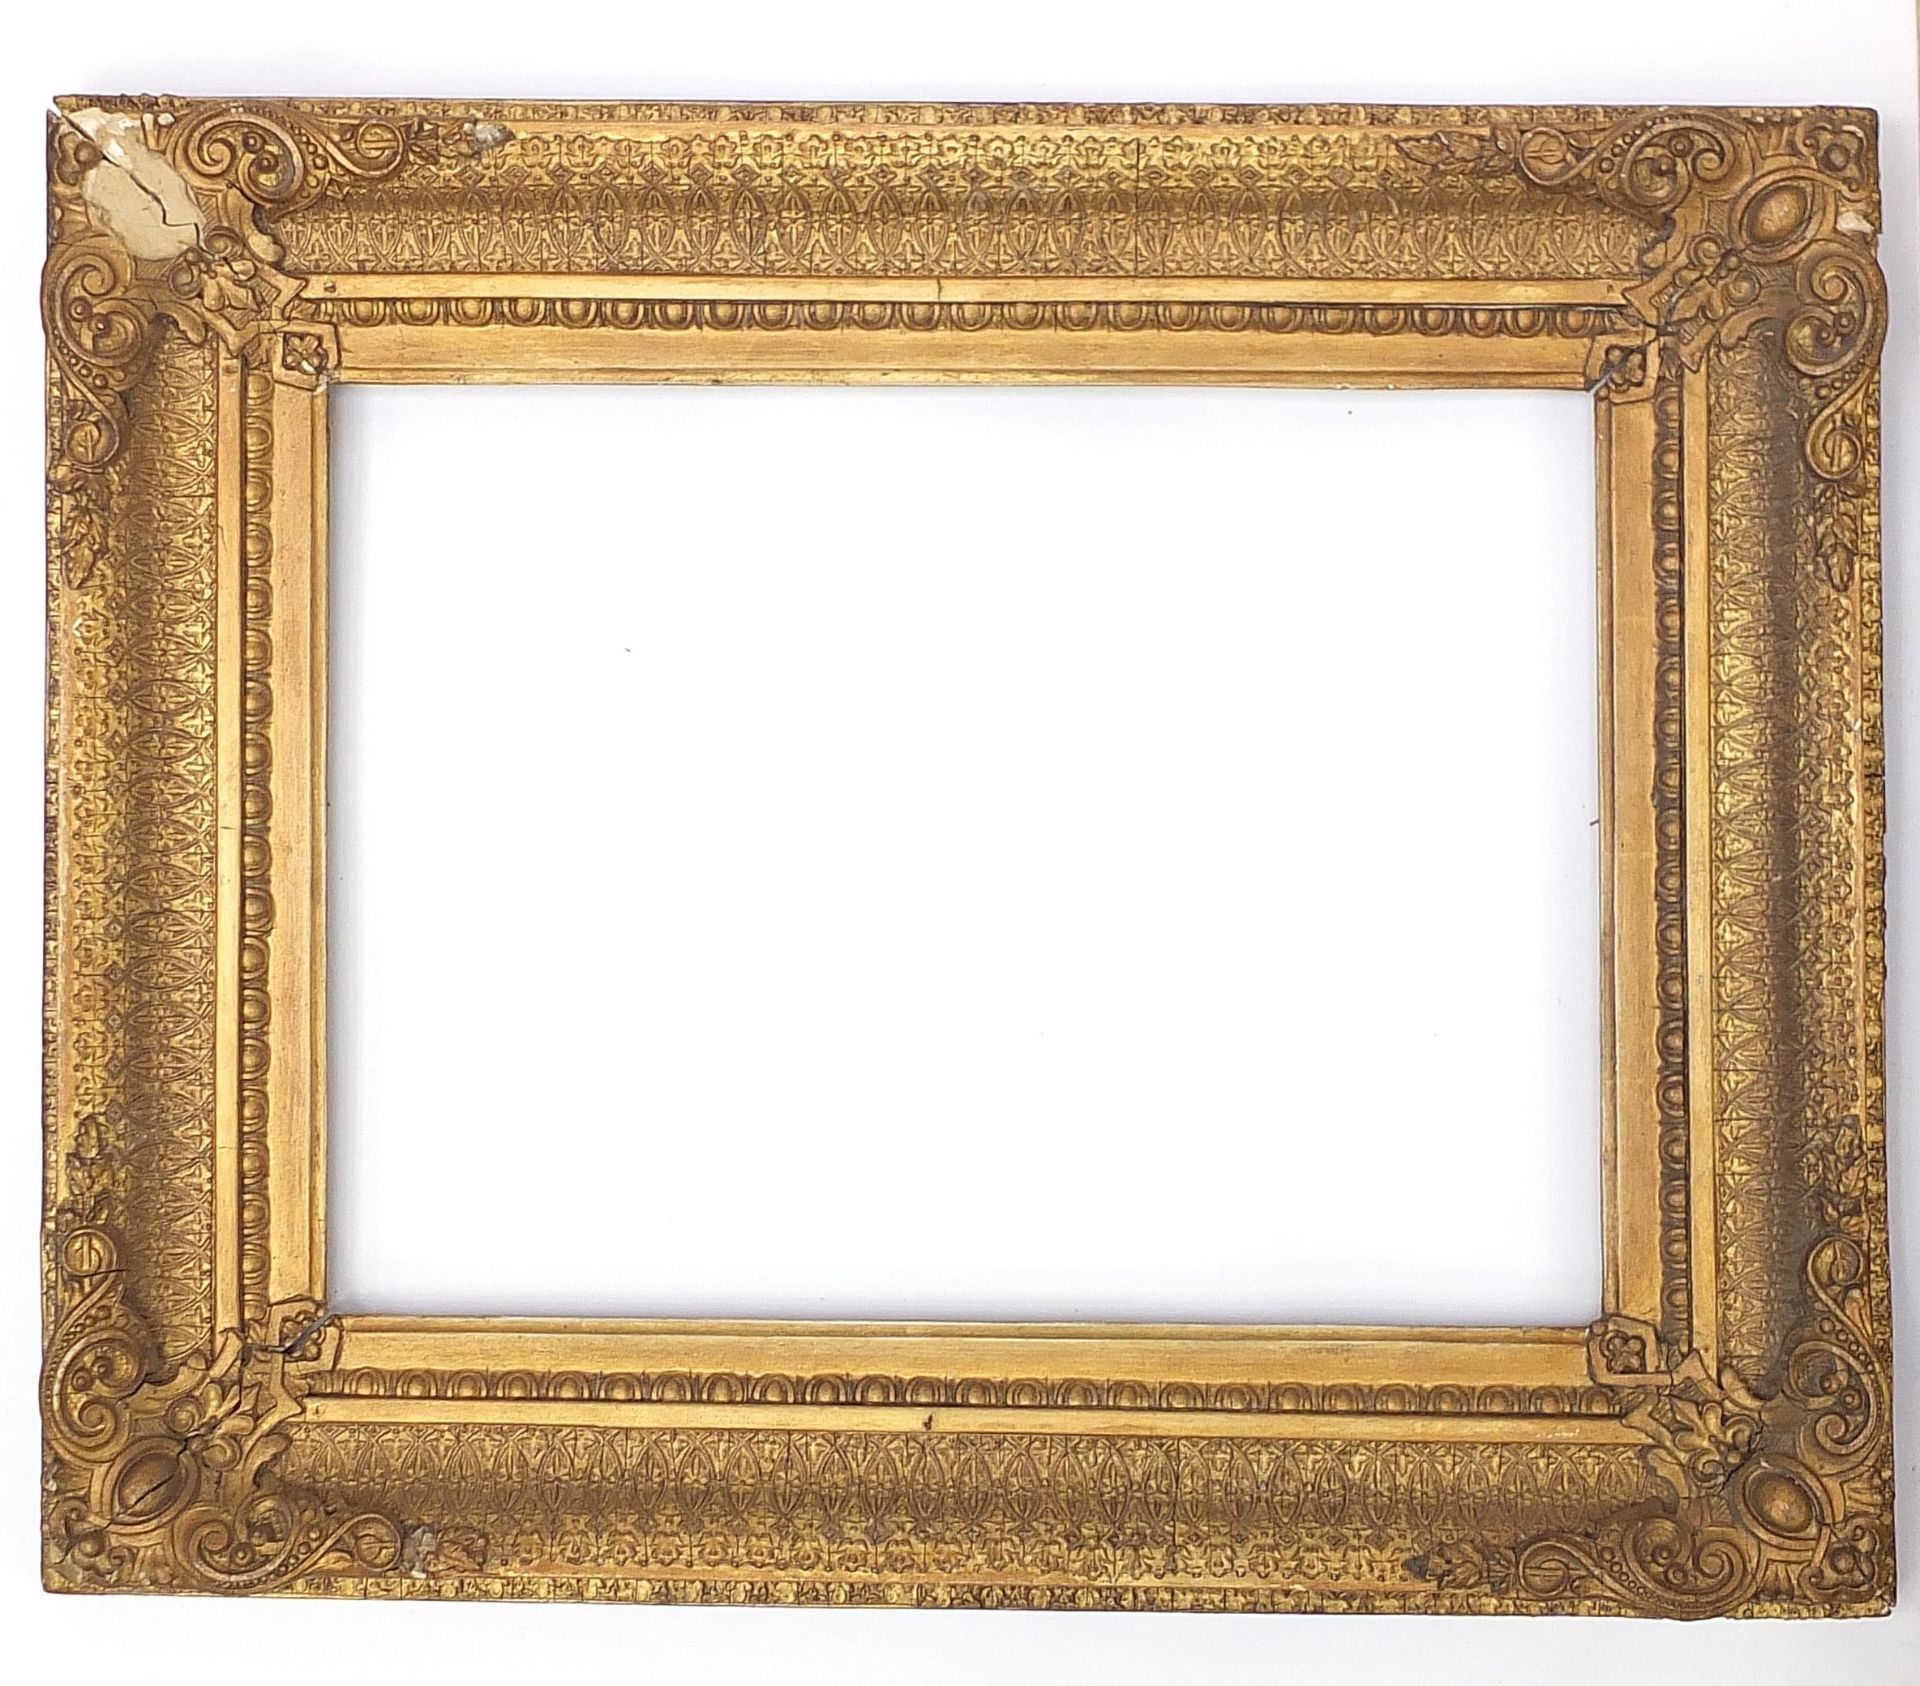 Two 19th century ornate gilt frames, the aperture sizes 56cm x 48cm and 43cm x 31.5cm - Image 2 of 4